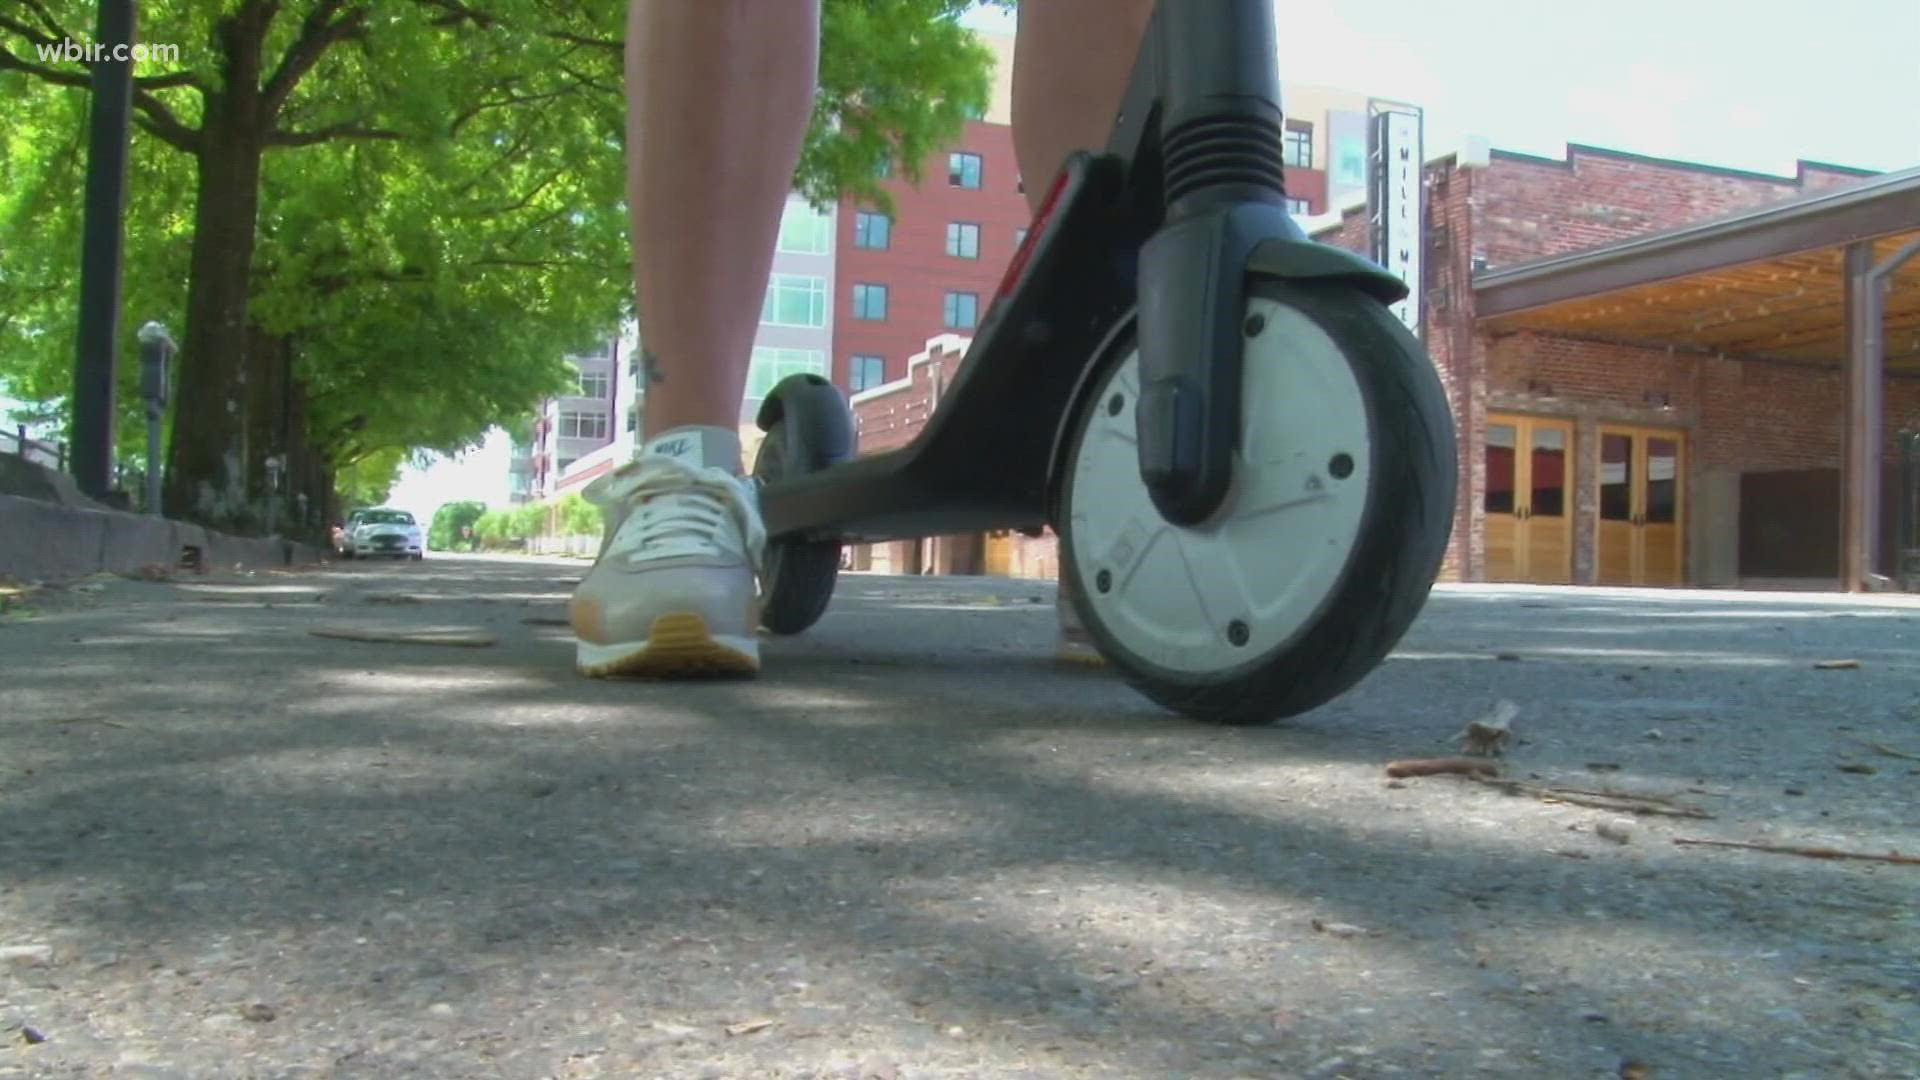 One of the proposed changes involves taking some parking spots and turning them into scooter docking stations.